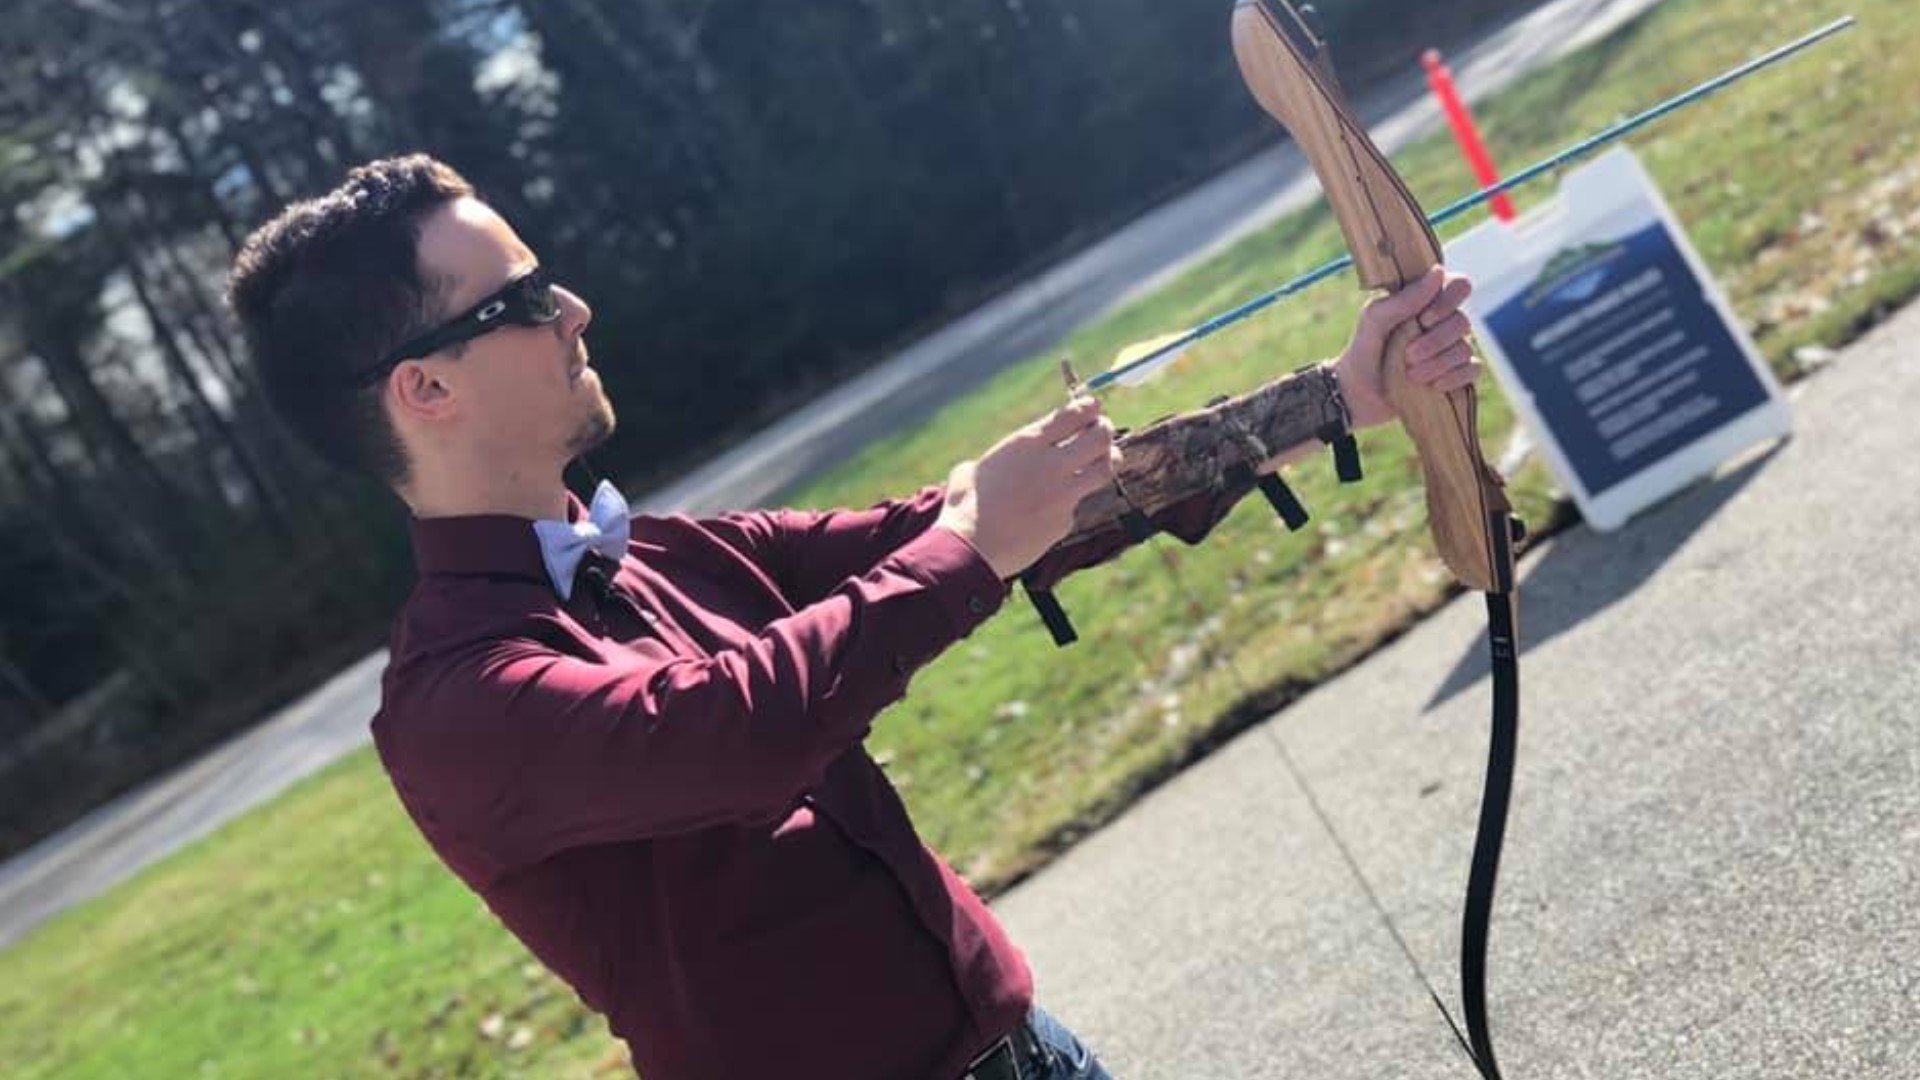 Cory Froomkin discovers archery as a possible fun activity to do this summer. He heads to the L.L. Bean Outdoor Discovery School to learn more.